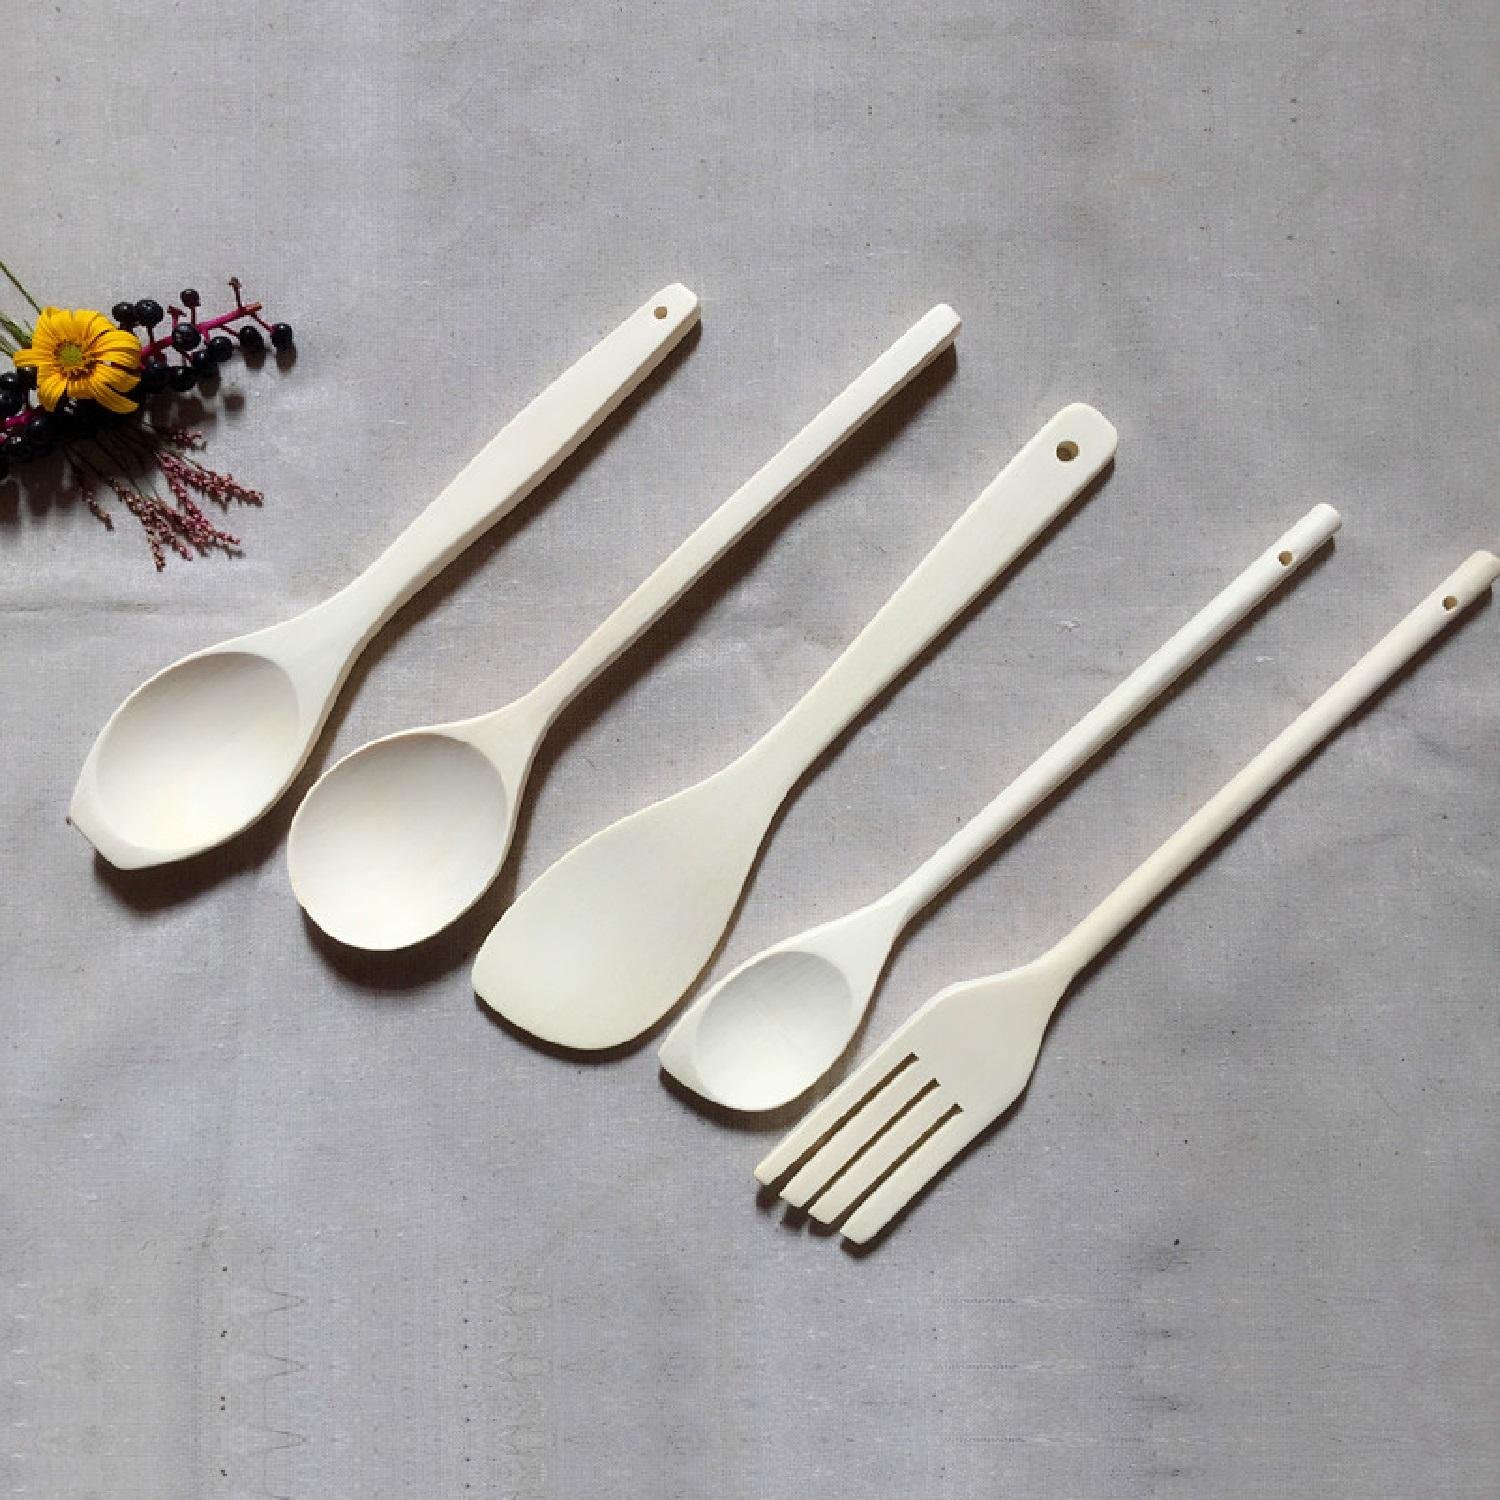 5 Pieces Wooden Cutlery for Family and Restaurant